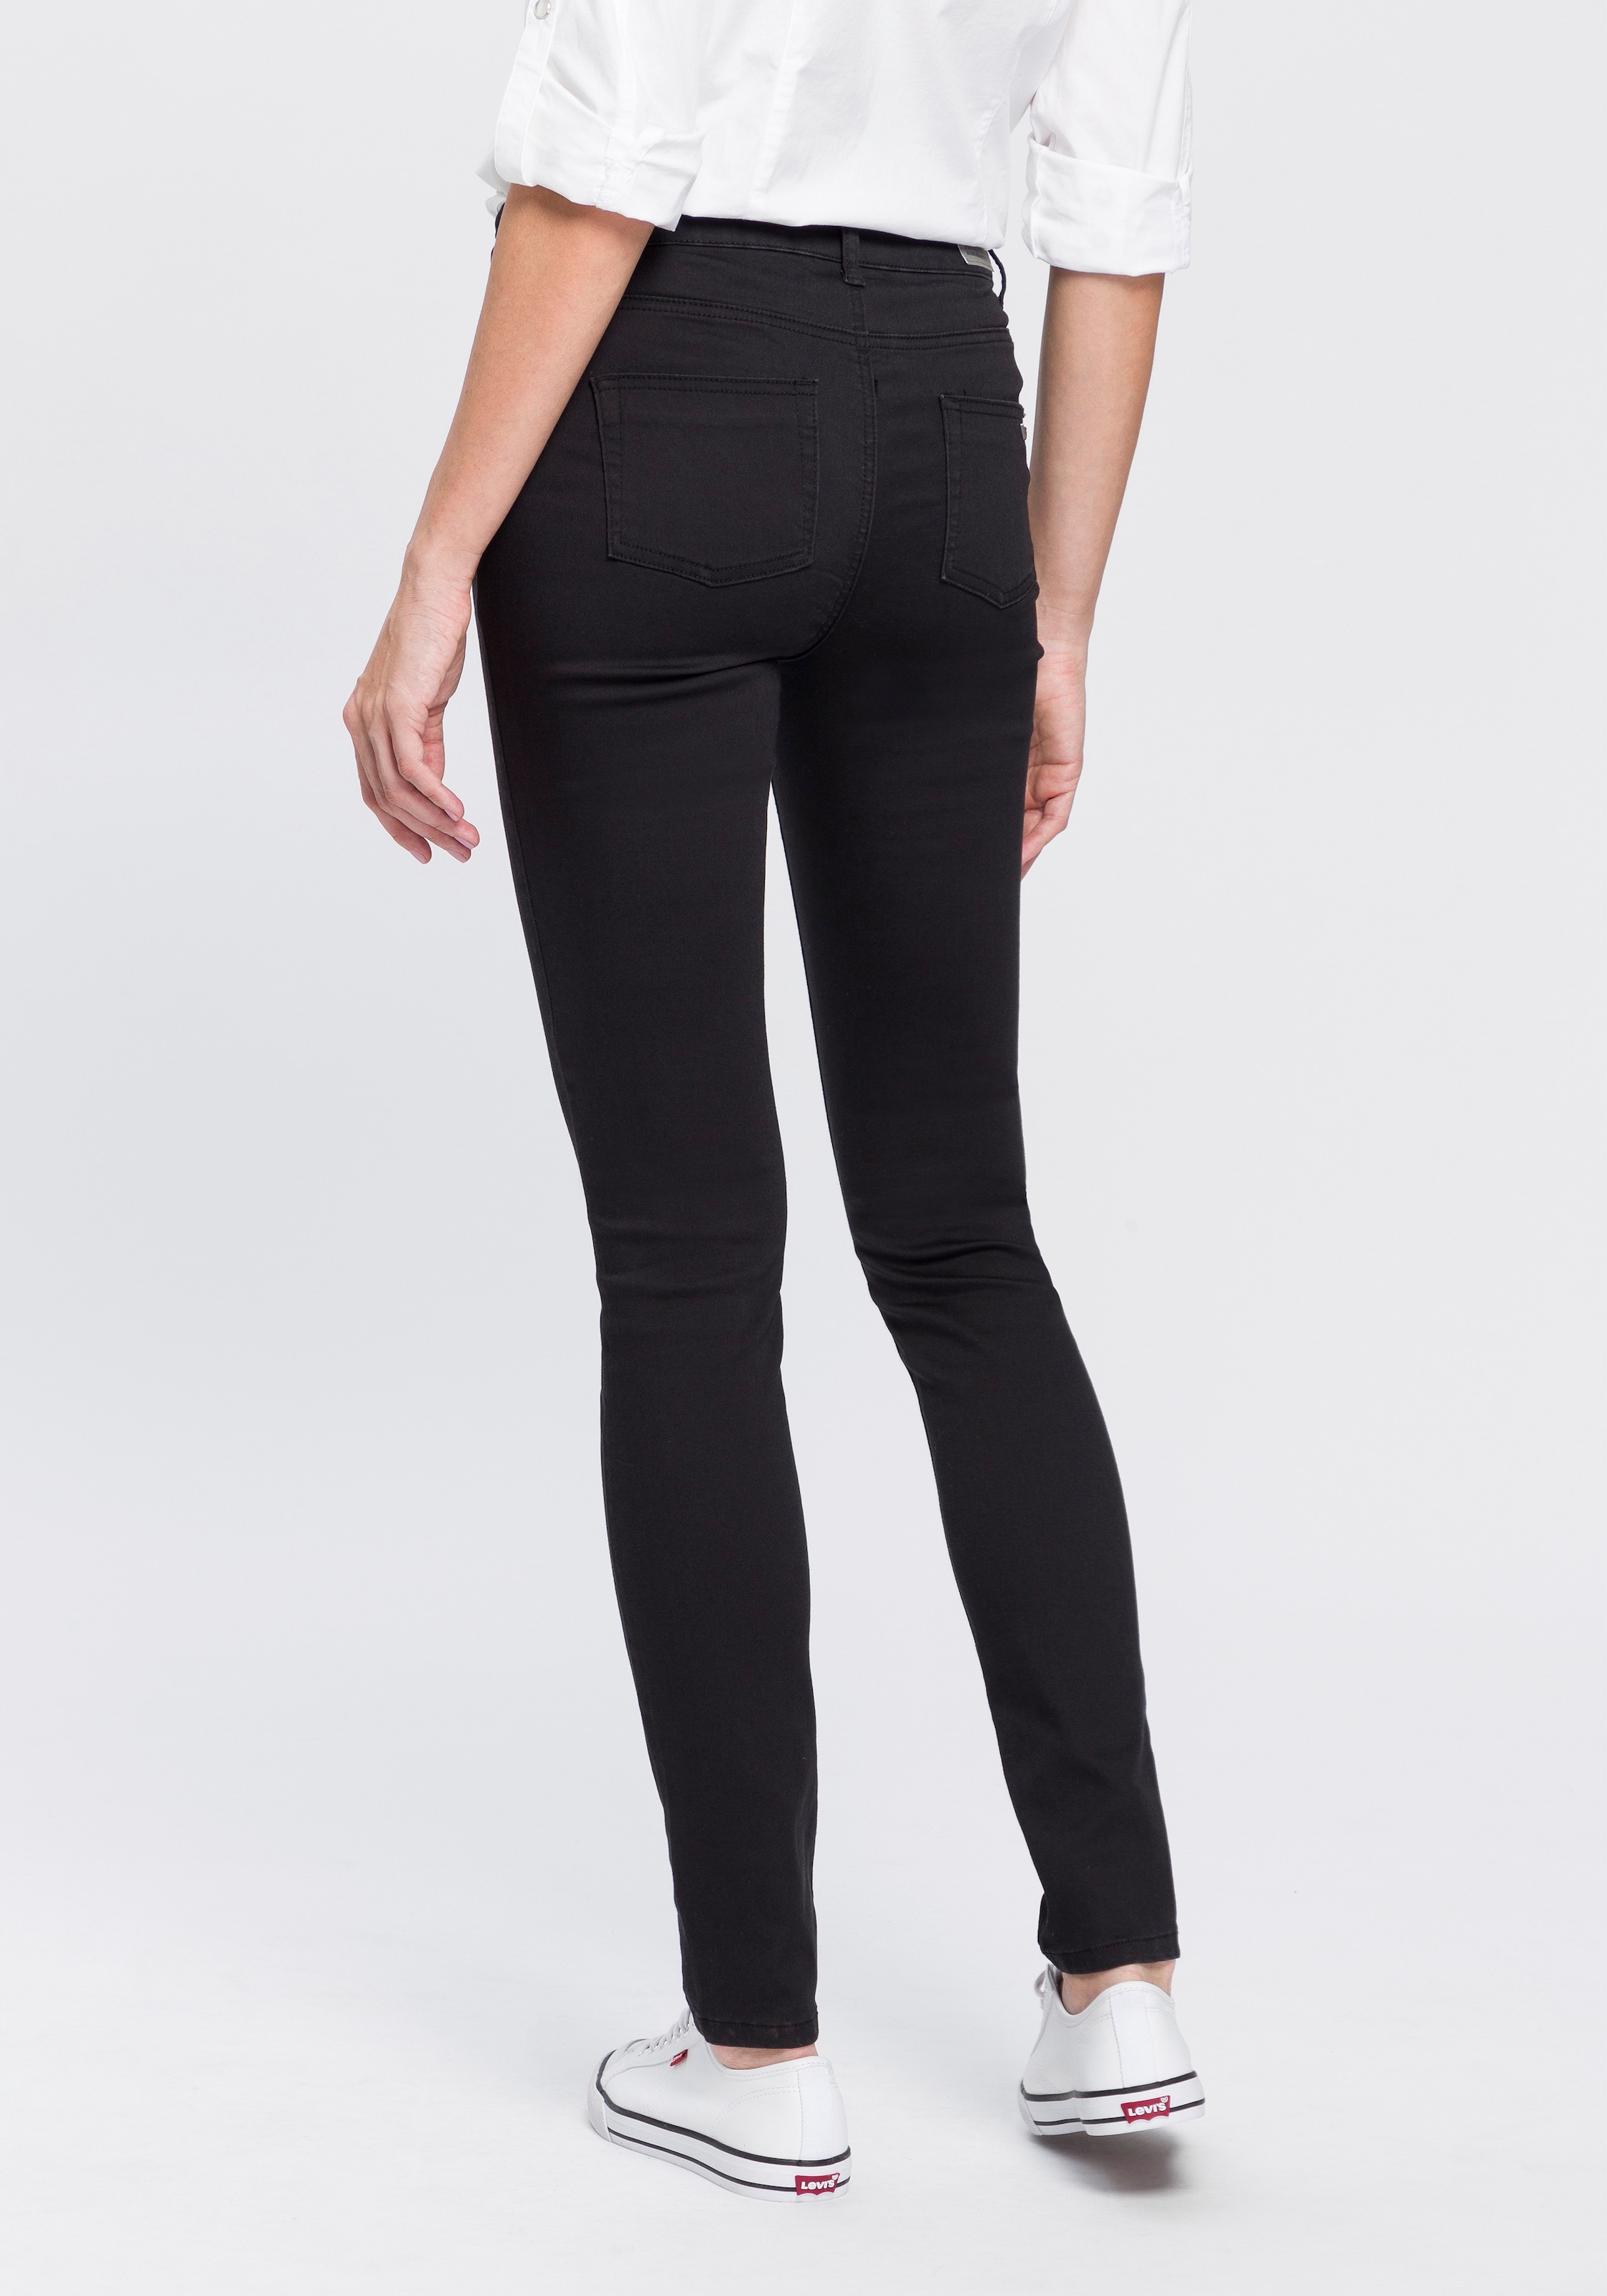 Arizona Skinny-fit-Jeans »Shaping«, High Waist online kaufen | BAUR | Stretchjeans